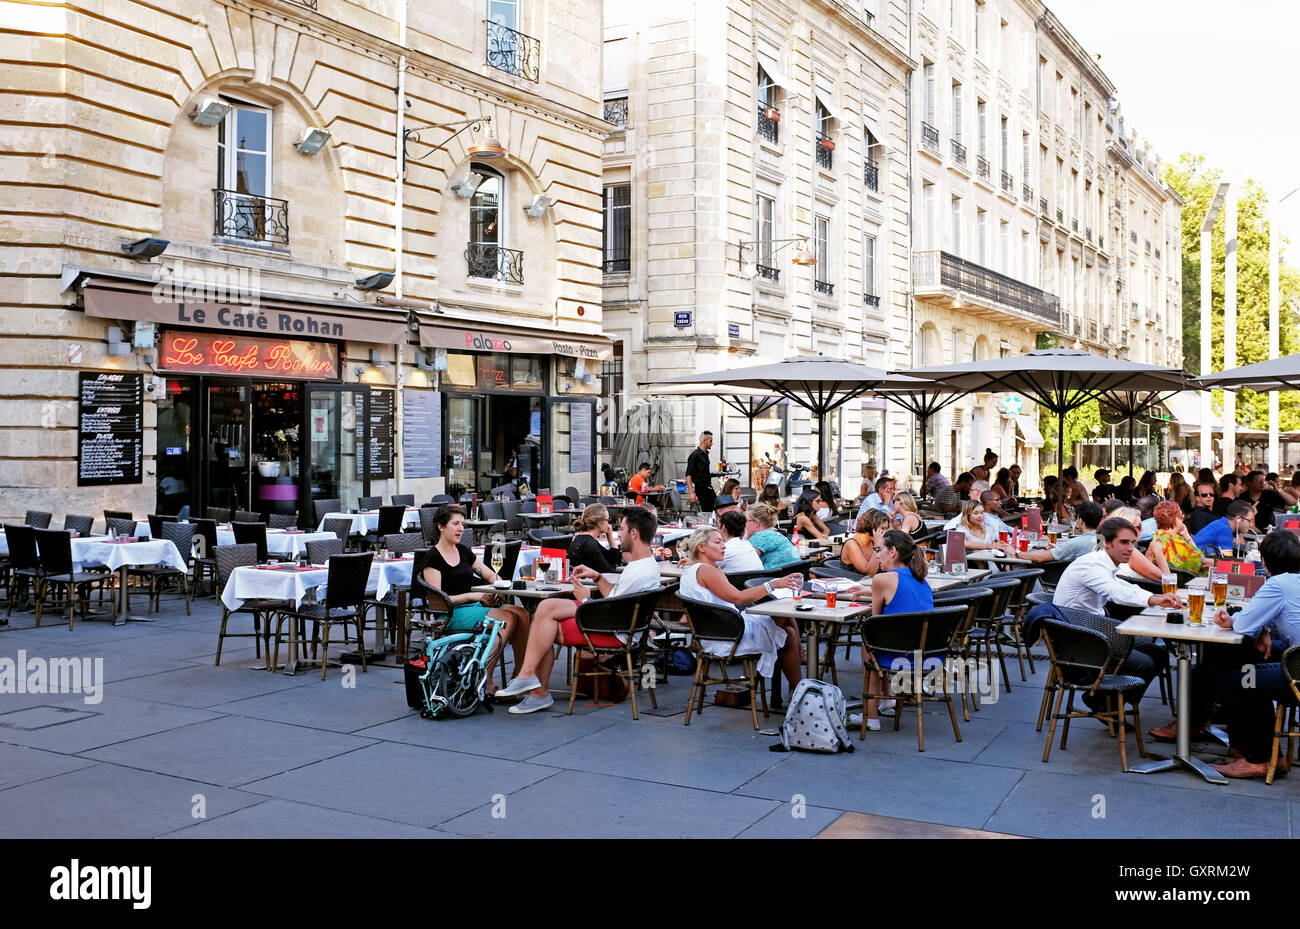 Le Cafe Rohan in Bordeaux a port city on the Garonne River in the Gironde  department in south west France Stock Photo - Alamy